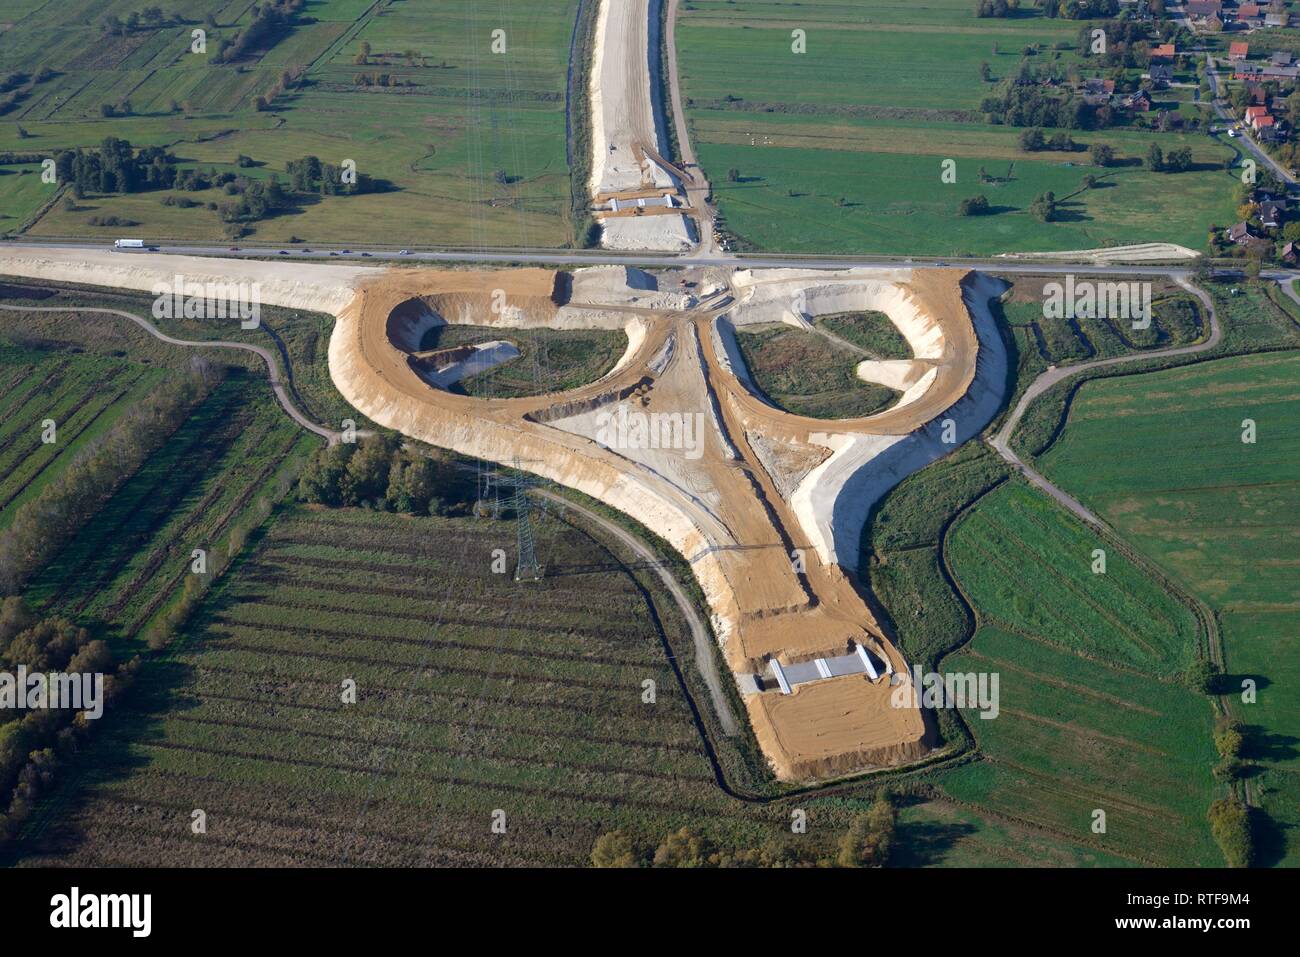 Aerial view, motorway construction site A26, conversion to motorway junction, Neu Wulmstorf, Lower Saxony, Germany Stock Photo